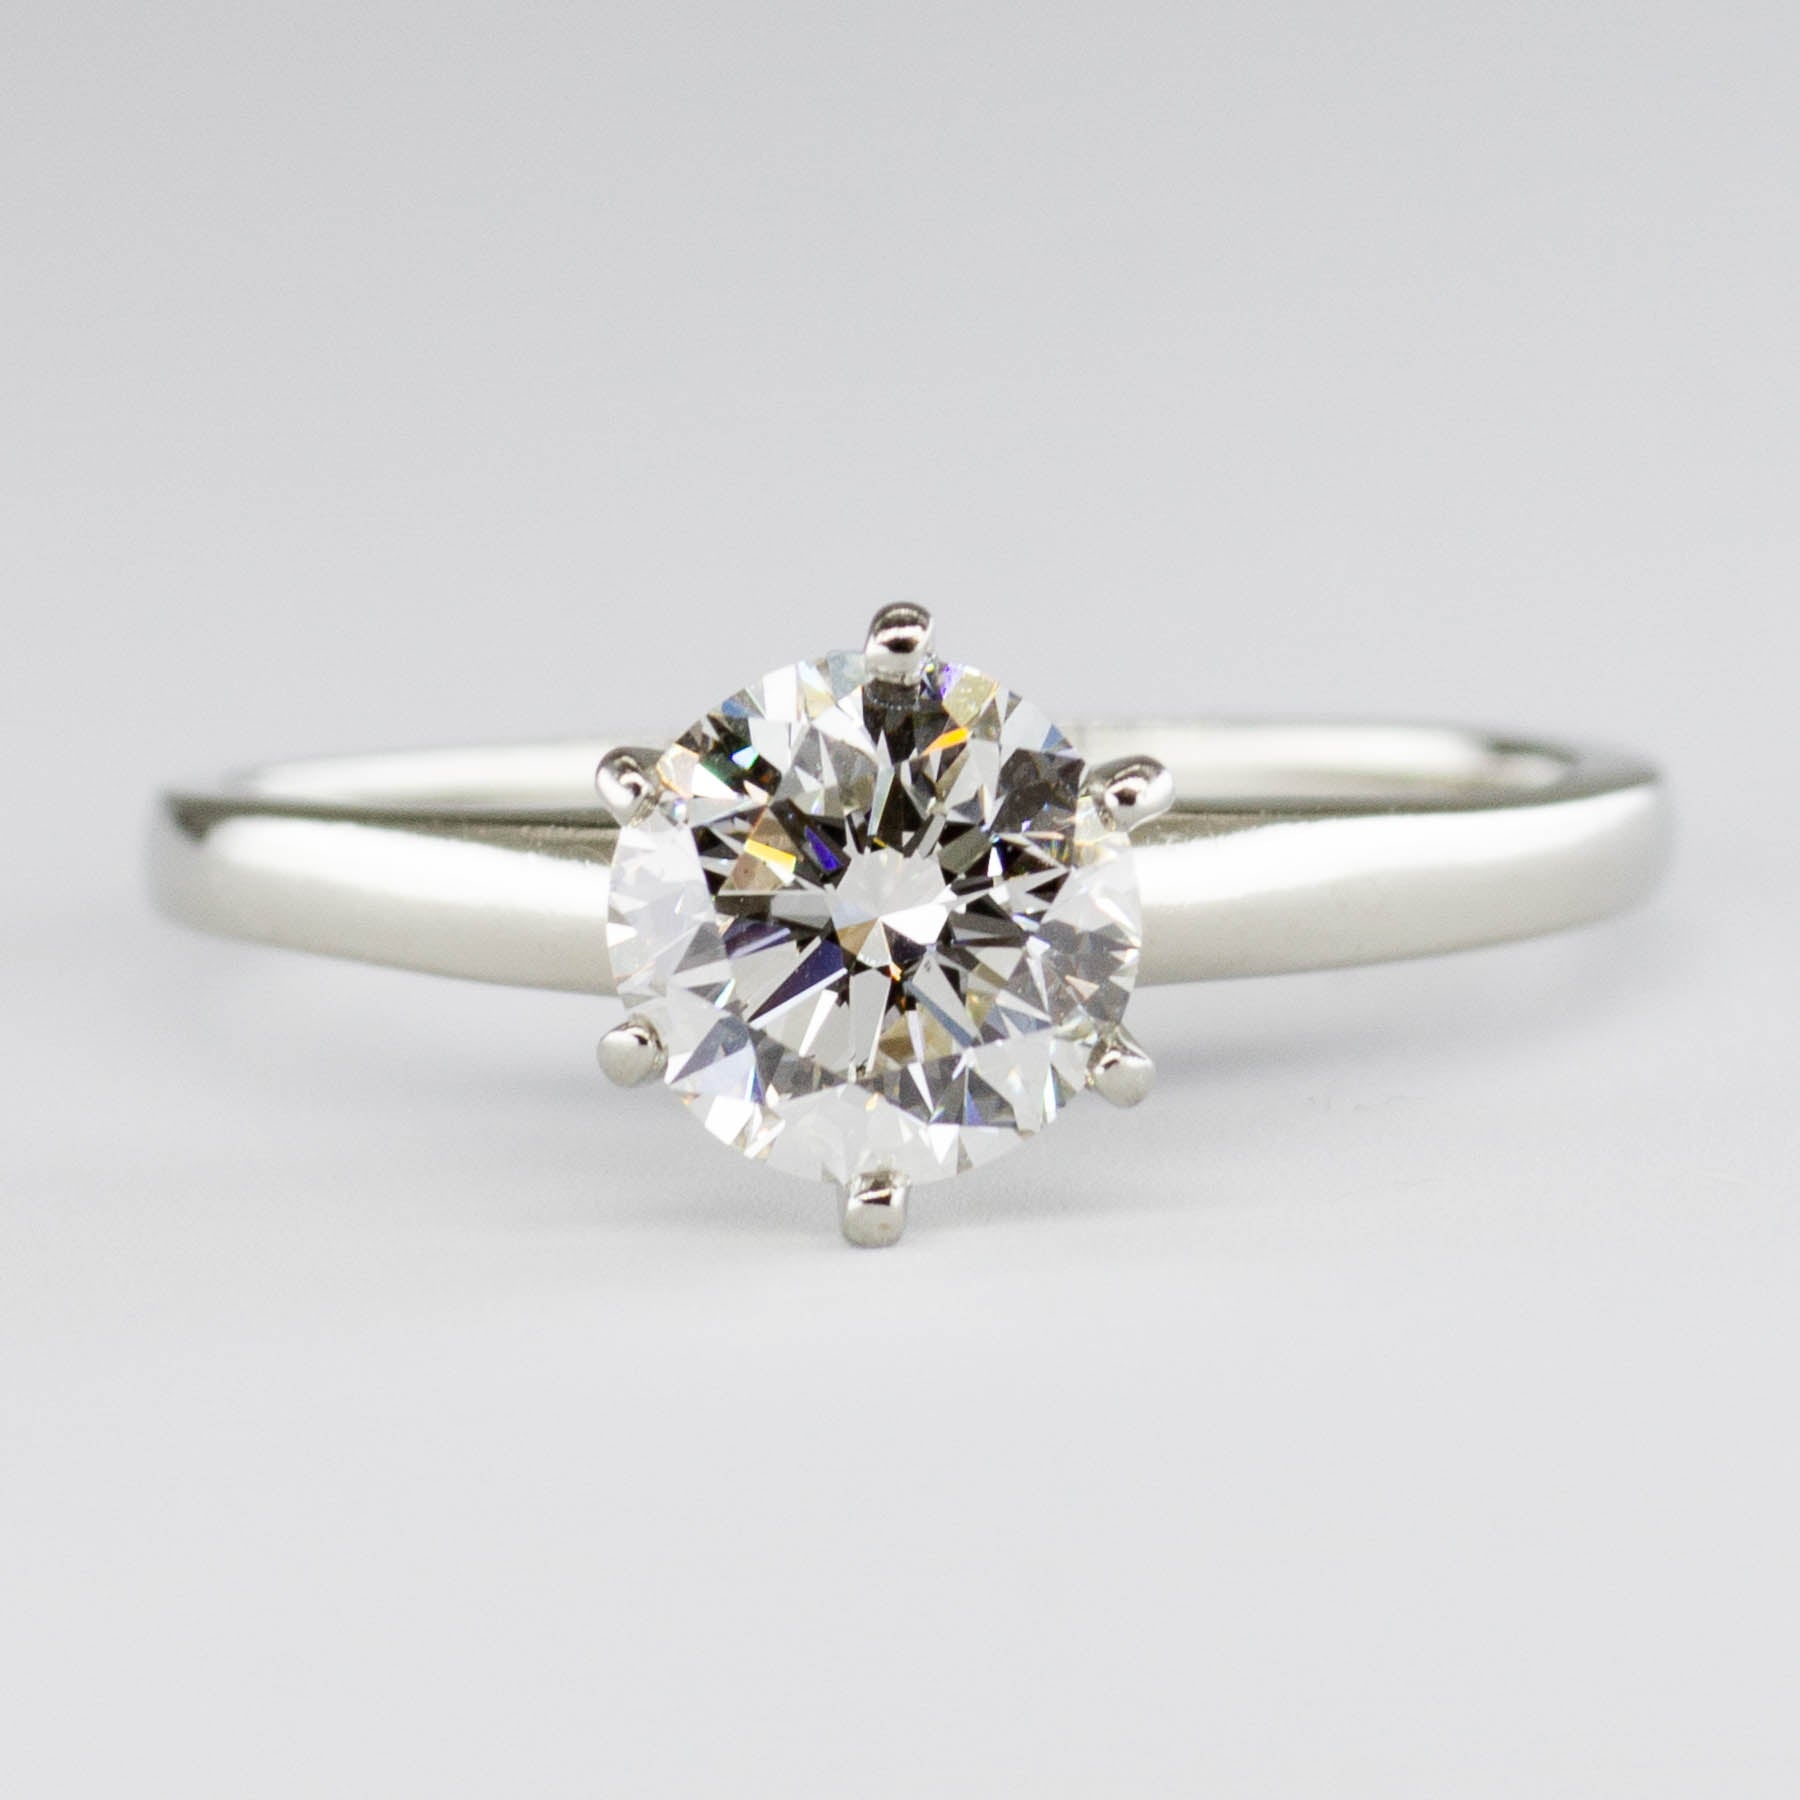 Six Prong White Gold Diamond Solitaire Ring | 1.01ct SI1 I | SZ 6 |